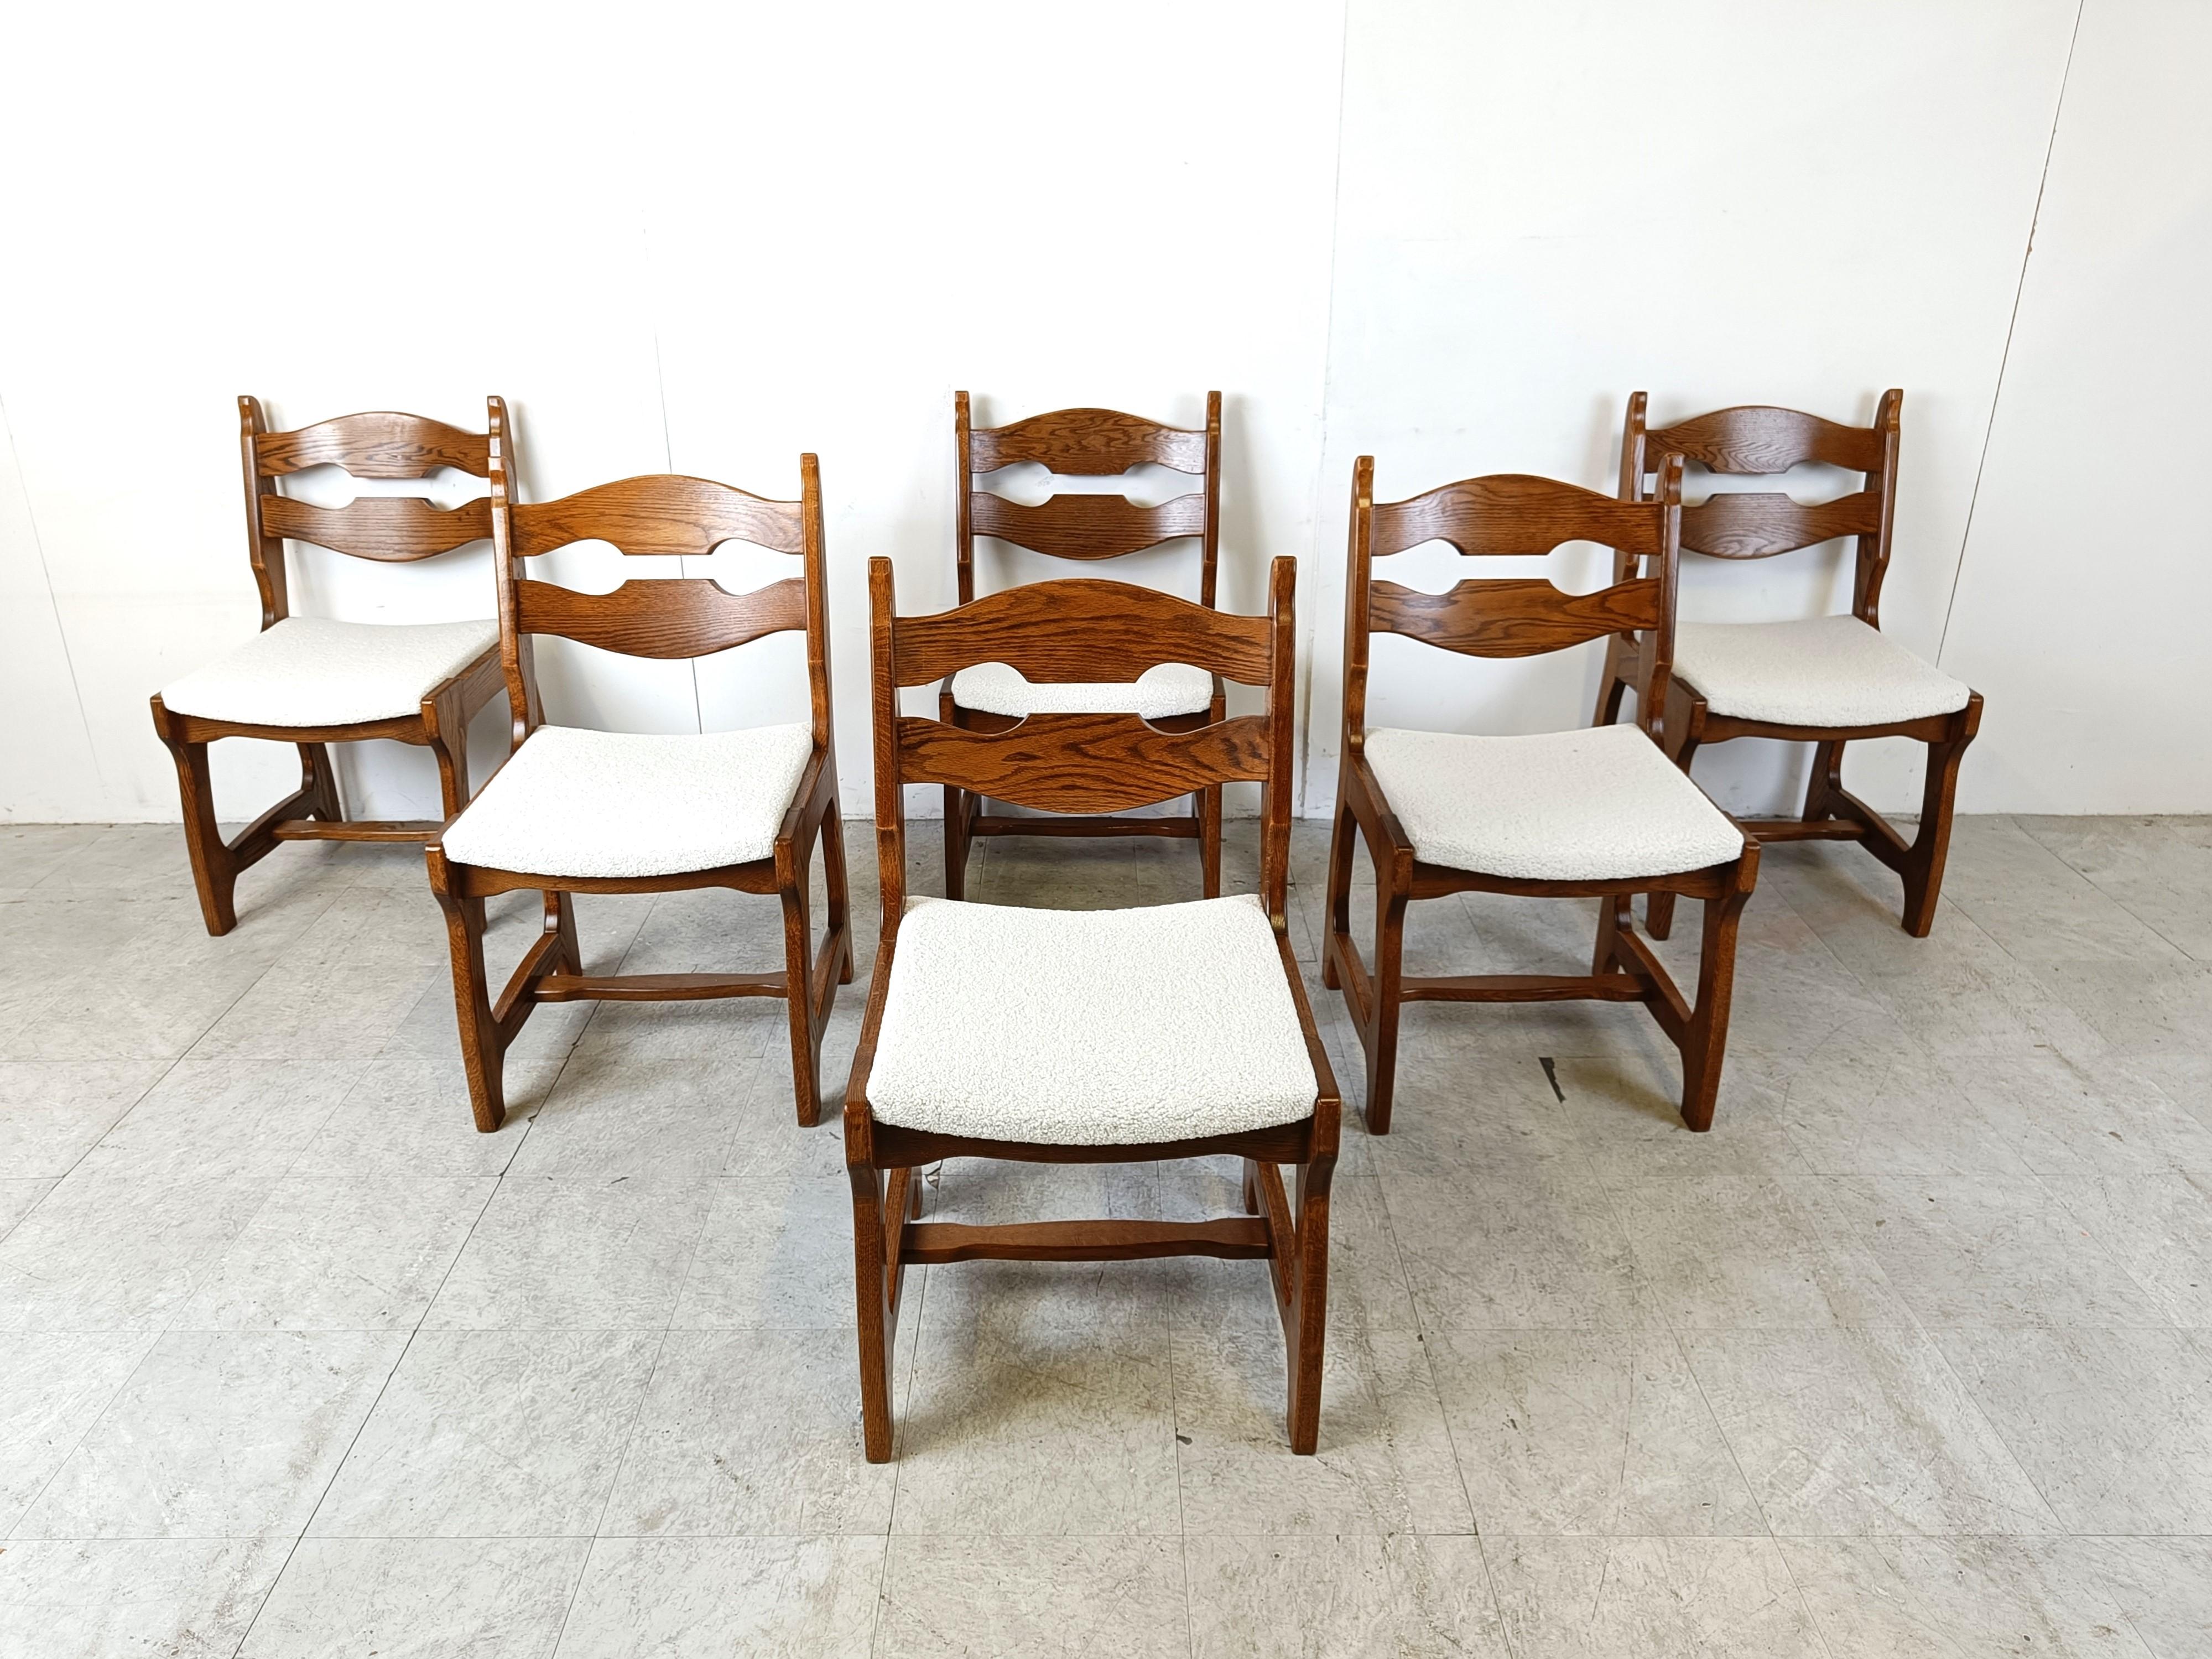 Nicely designed brutalist dining chairs with oak frames and newly upholstered seats in bouclé fabric.

Beautiful, timeless design which is very sturdy as well.

Good original condition.

1960s - Germany

Dimensions:
Height: 90cm/35.43